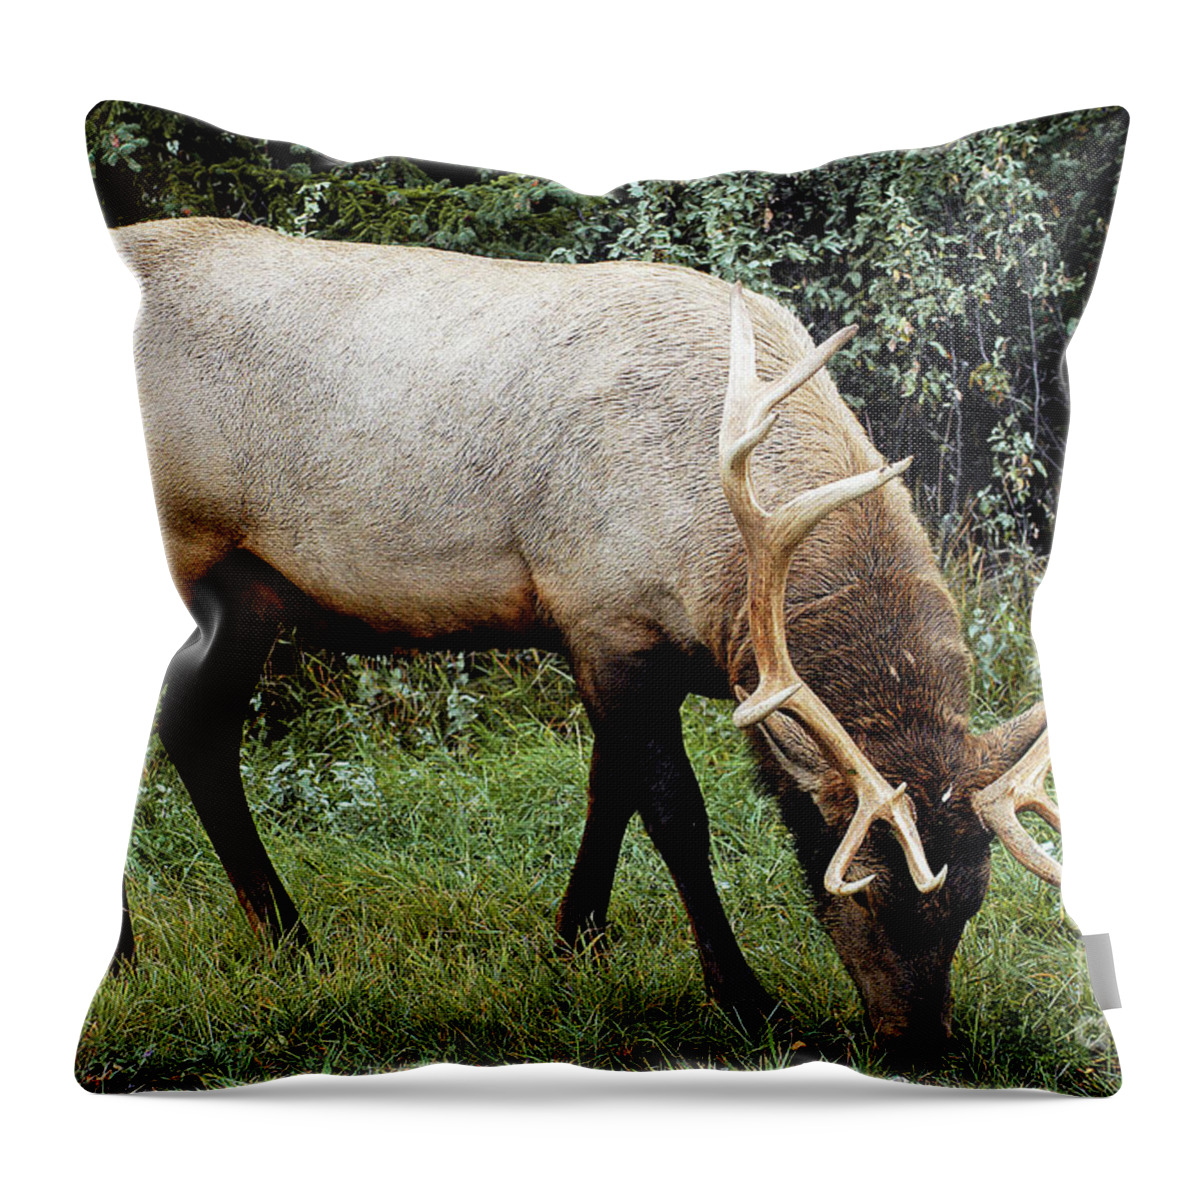 National Park Throw Pillow featuring the photograph Snack Time - Jasper National Park, Alberta, Canada by Paolo Signorini